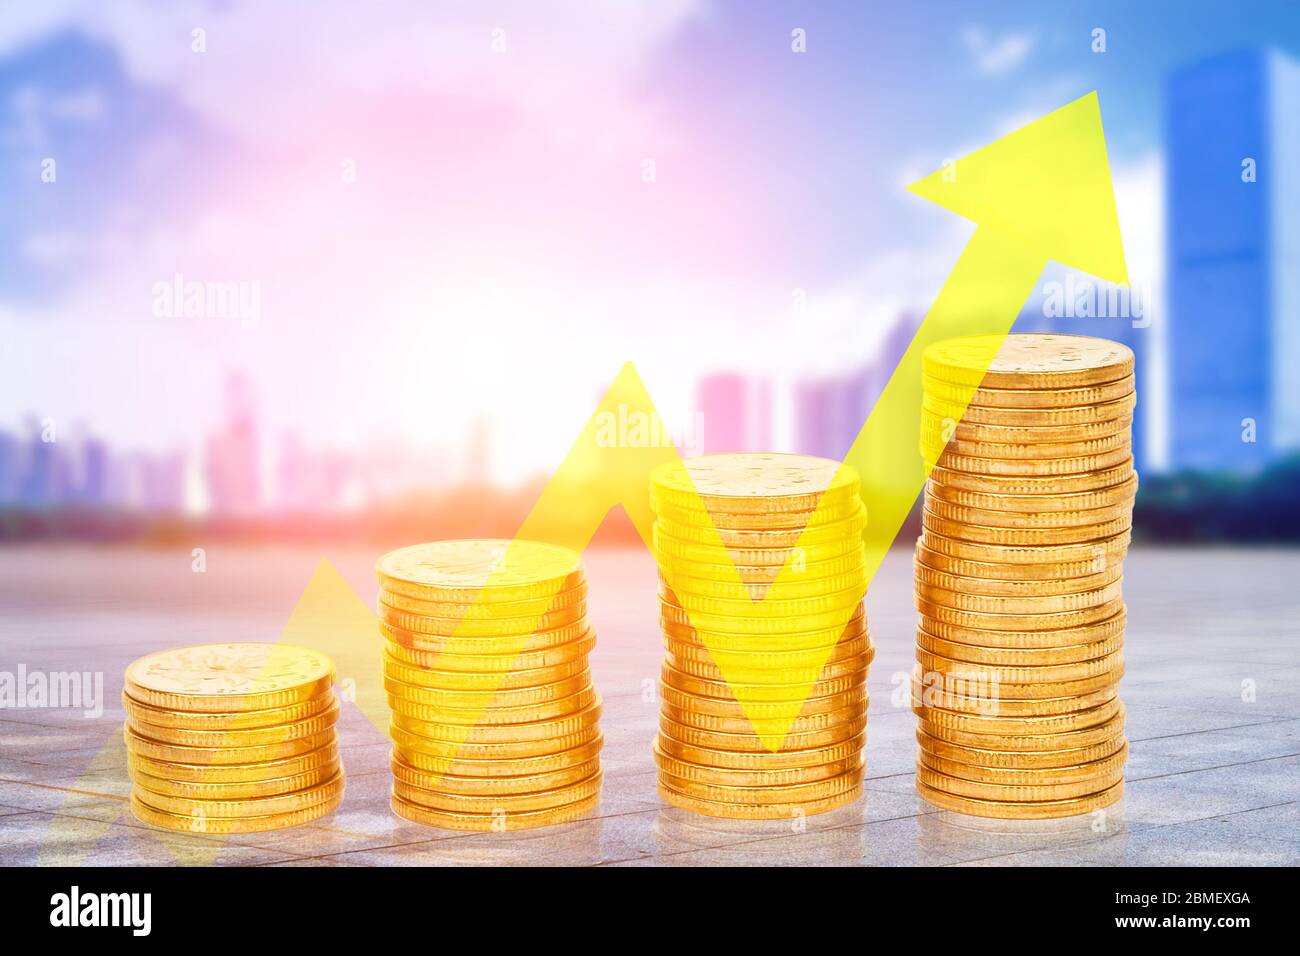 Creative illustration of folded gold coins and bokeh city financial center background, financial concept. Stock Photo